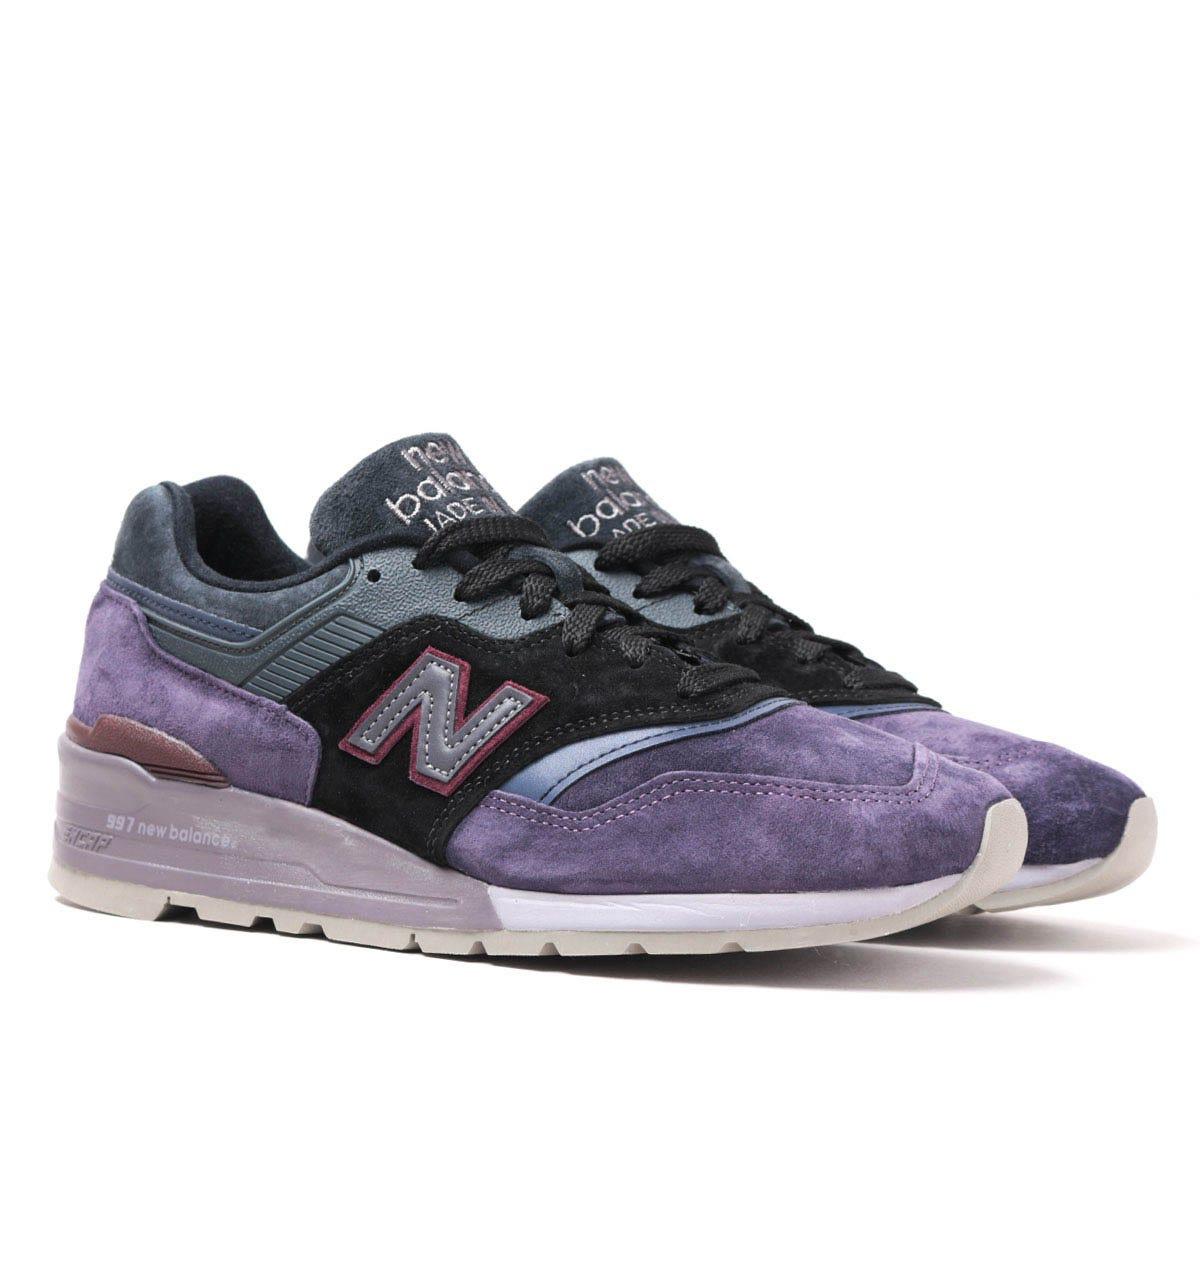 New Balance M997 Made In Usa Purple & Black Suede Trainers for Men - Lyst